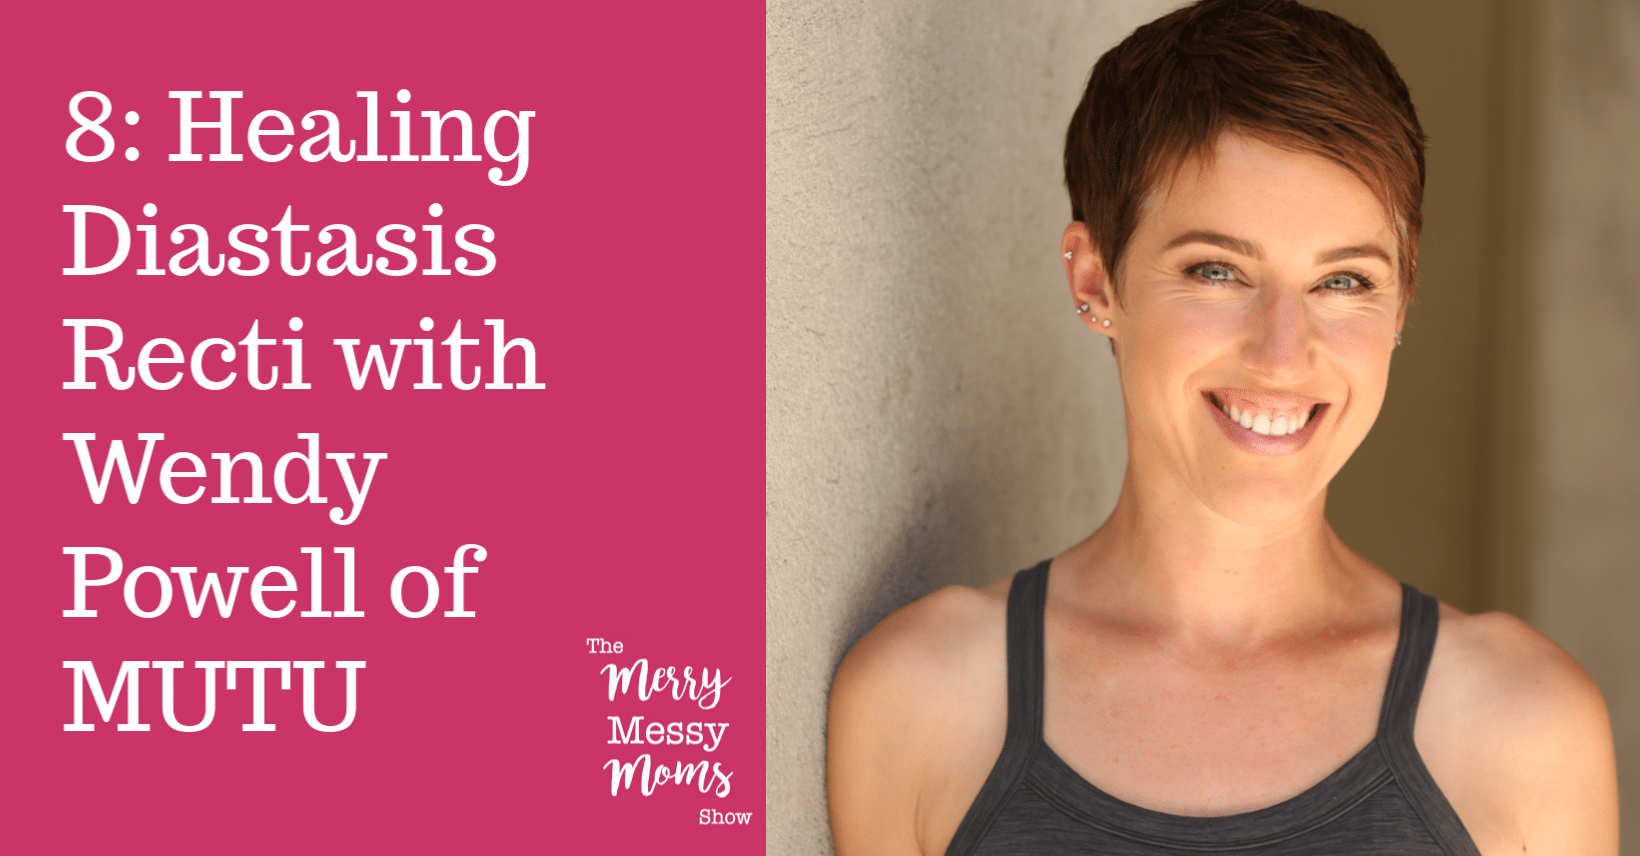 8: Healing Diastsis Recti with Wendy Powell of MUTU System